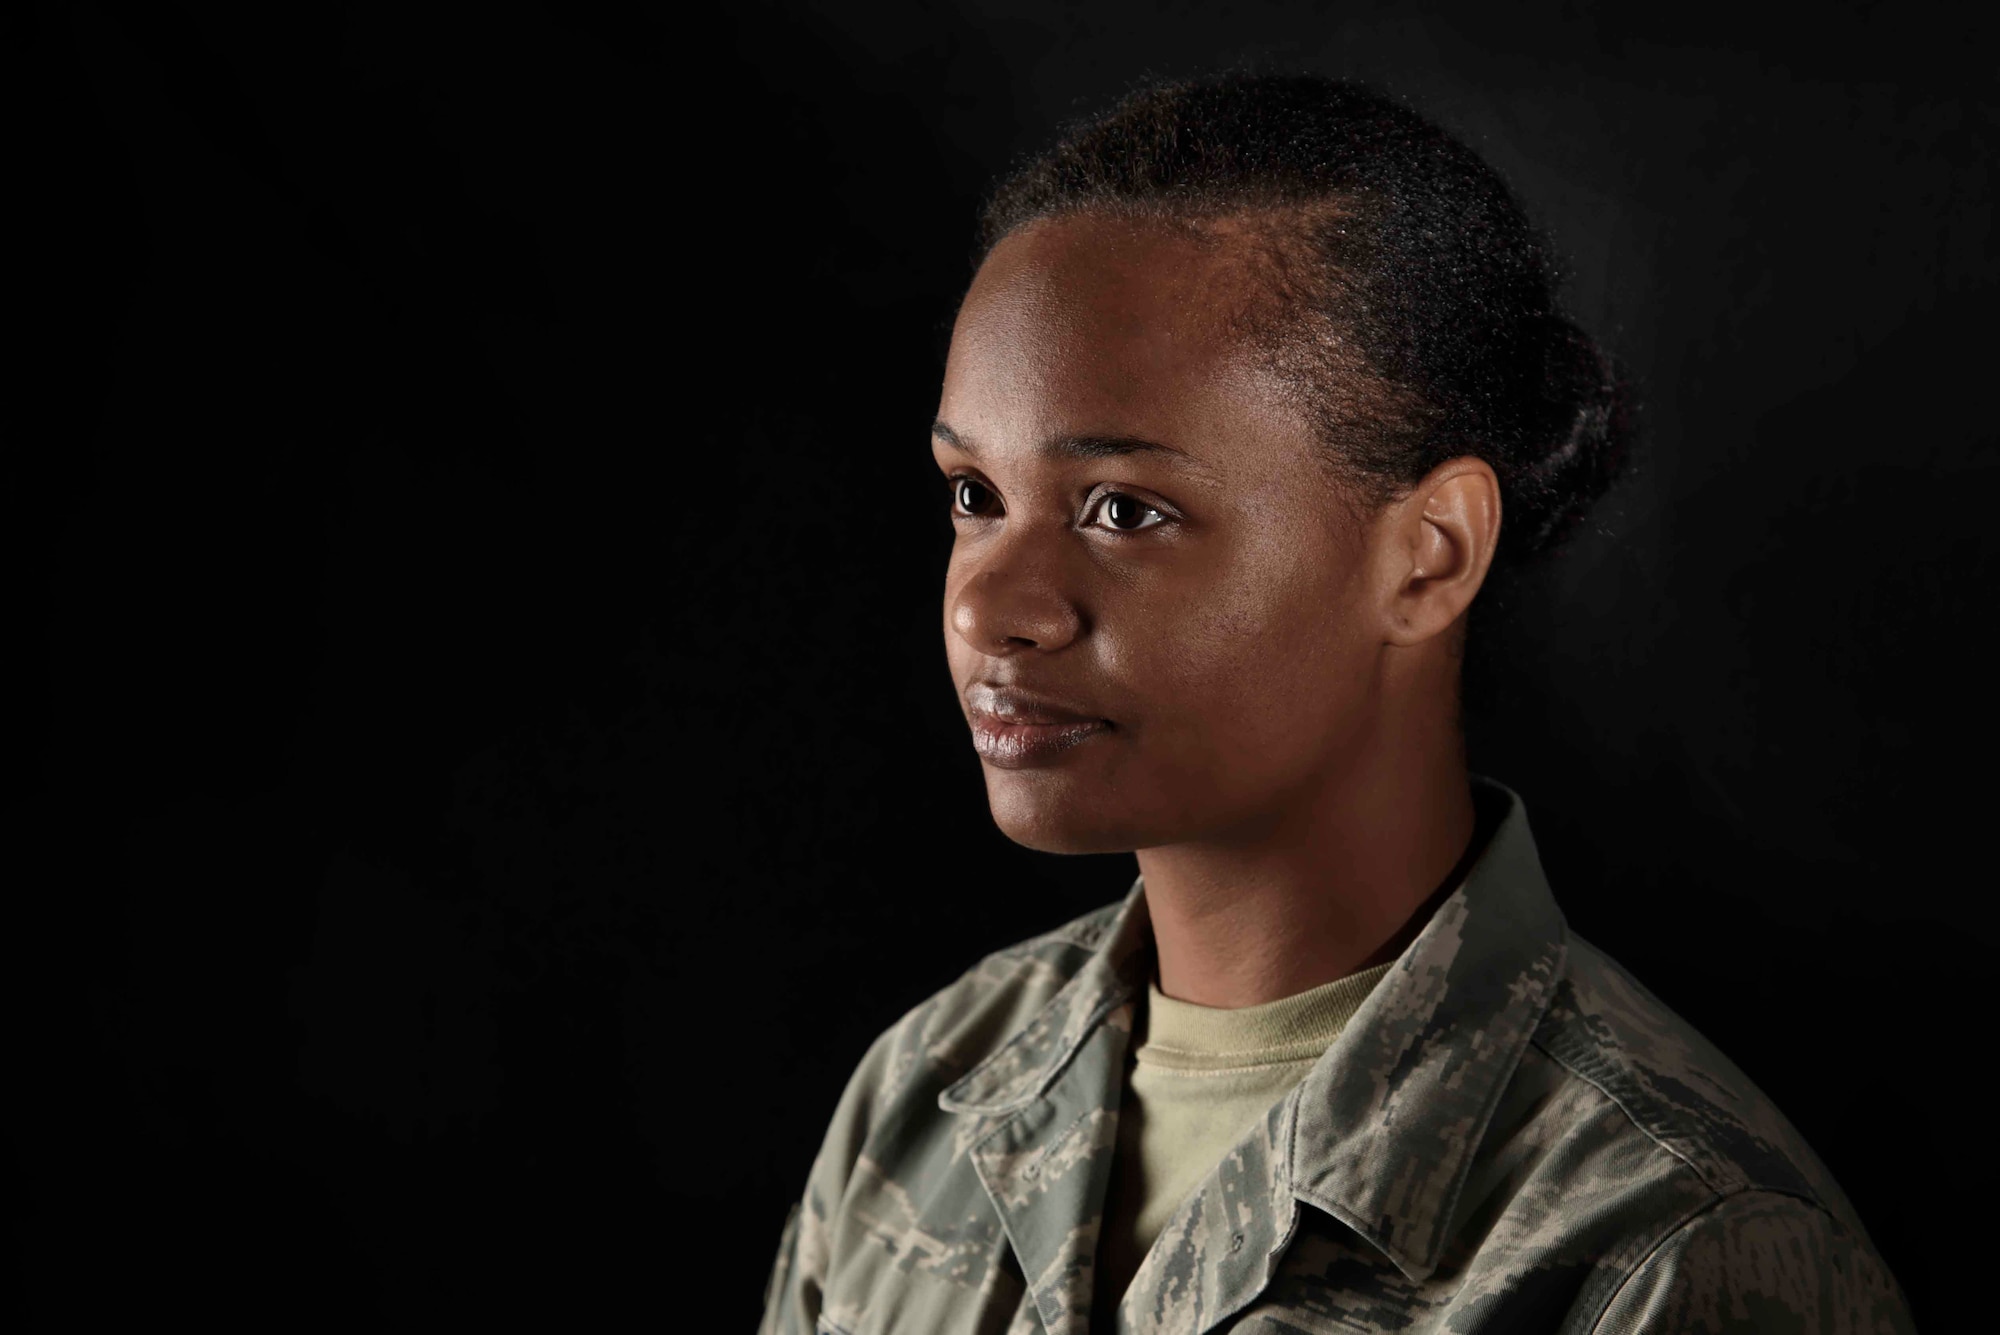 Senior Airman Augustine Thompson-Brown is a 35th Medical Operations Squadron mental health technician at Misawa Air Base, Japan. Thompson-Brown spent most of her life homeless before joining the Air Force and shares her story to inspire others to conquer their own difficulties. (U.S. Air Force photo/Airman 1st Class Jordyn Fetter)